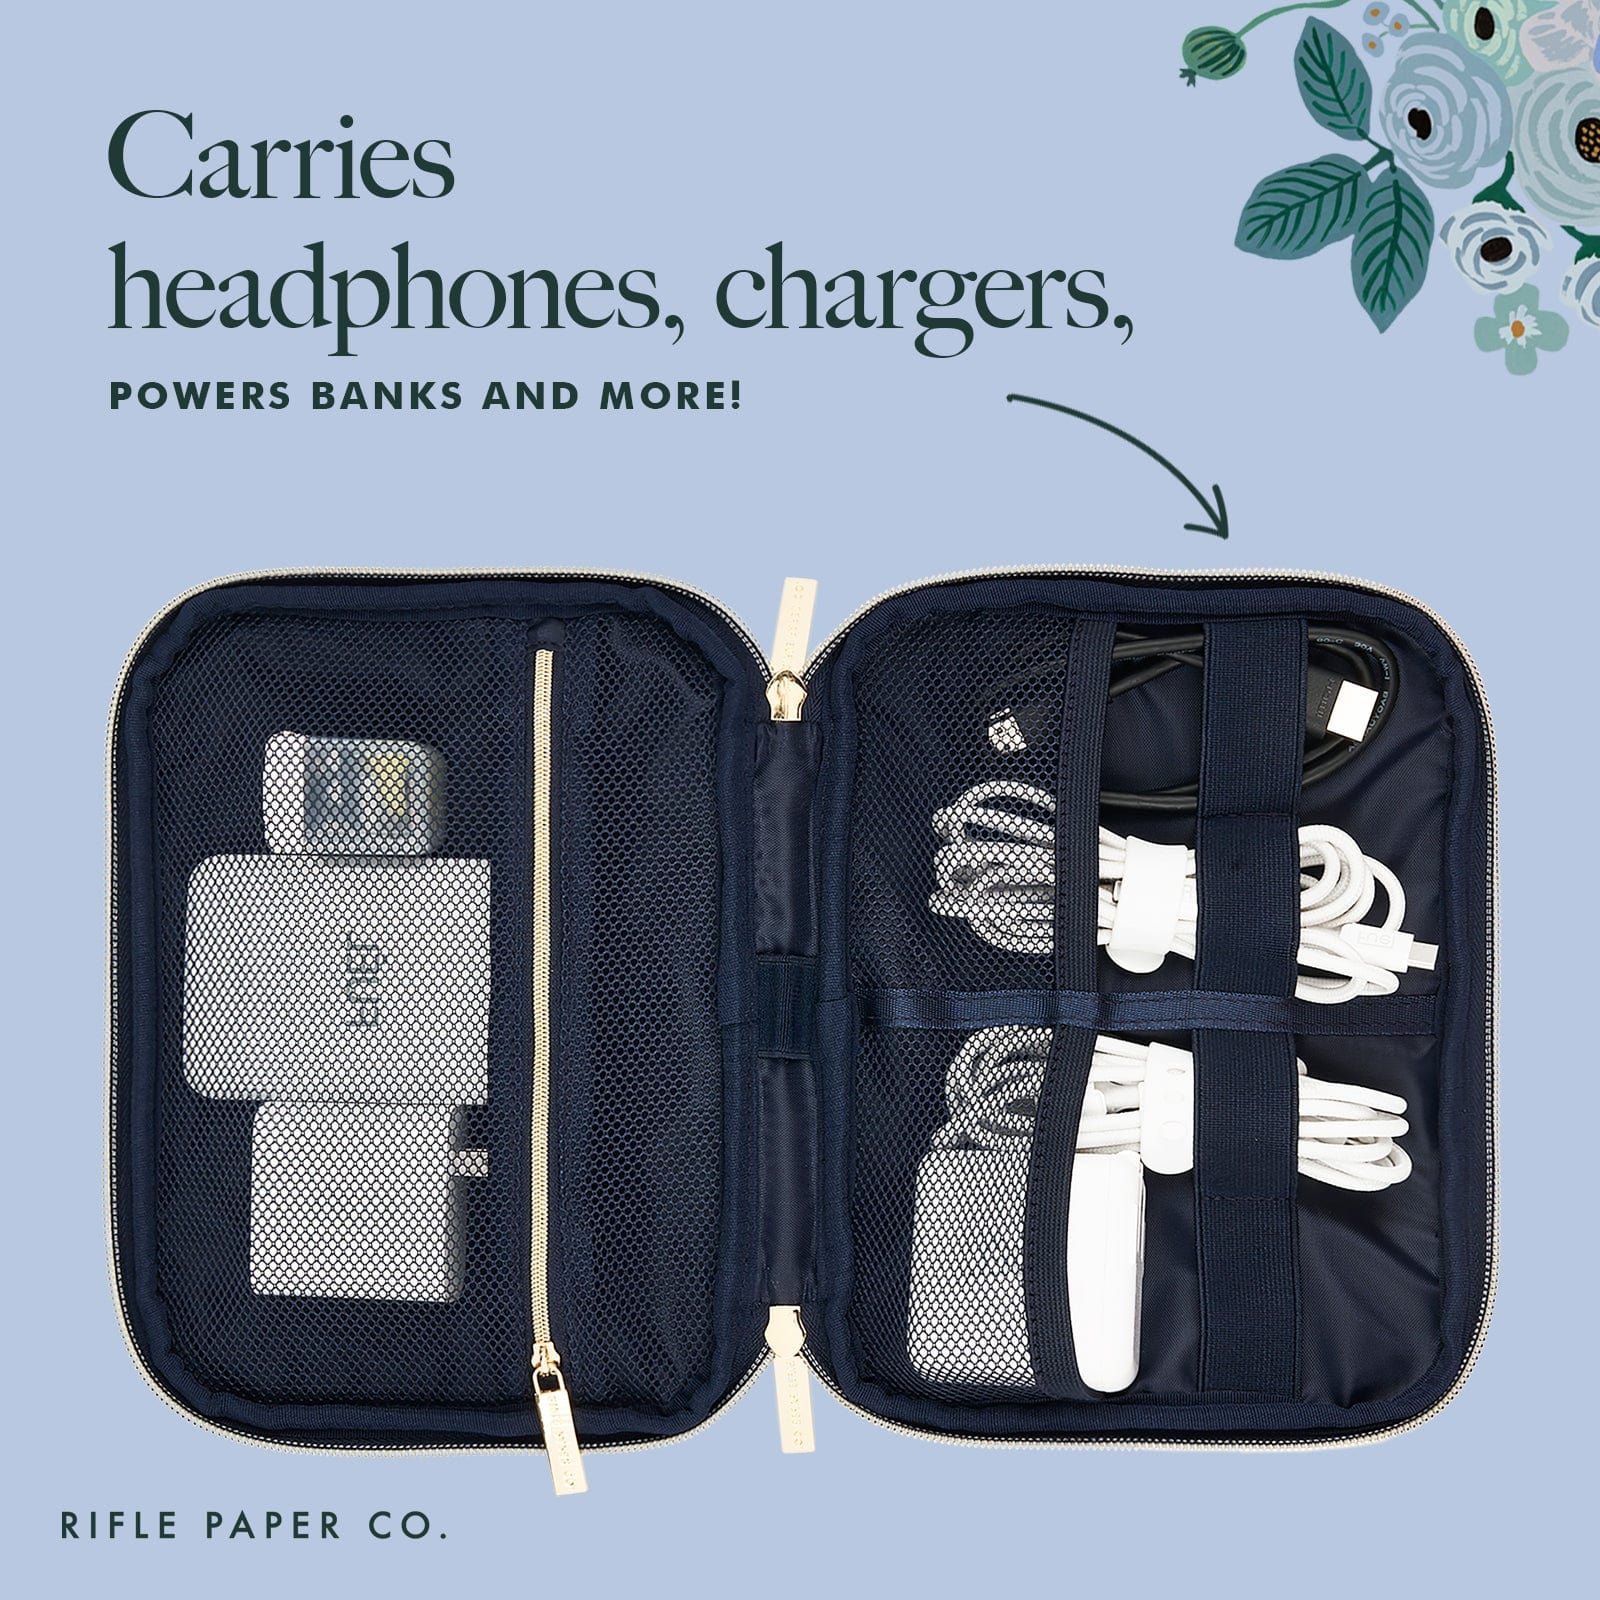 CARRIES HEADPHONES, CHARGERS, POWER BANKS AND MORE!